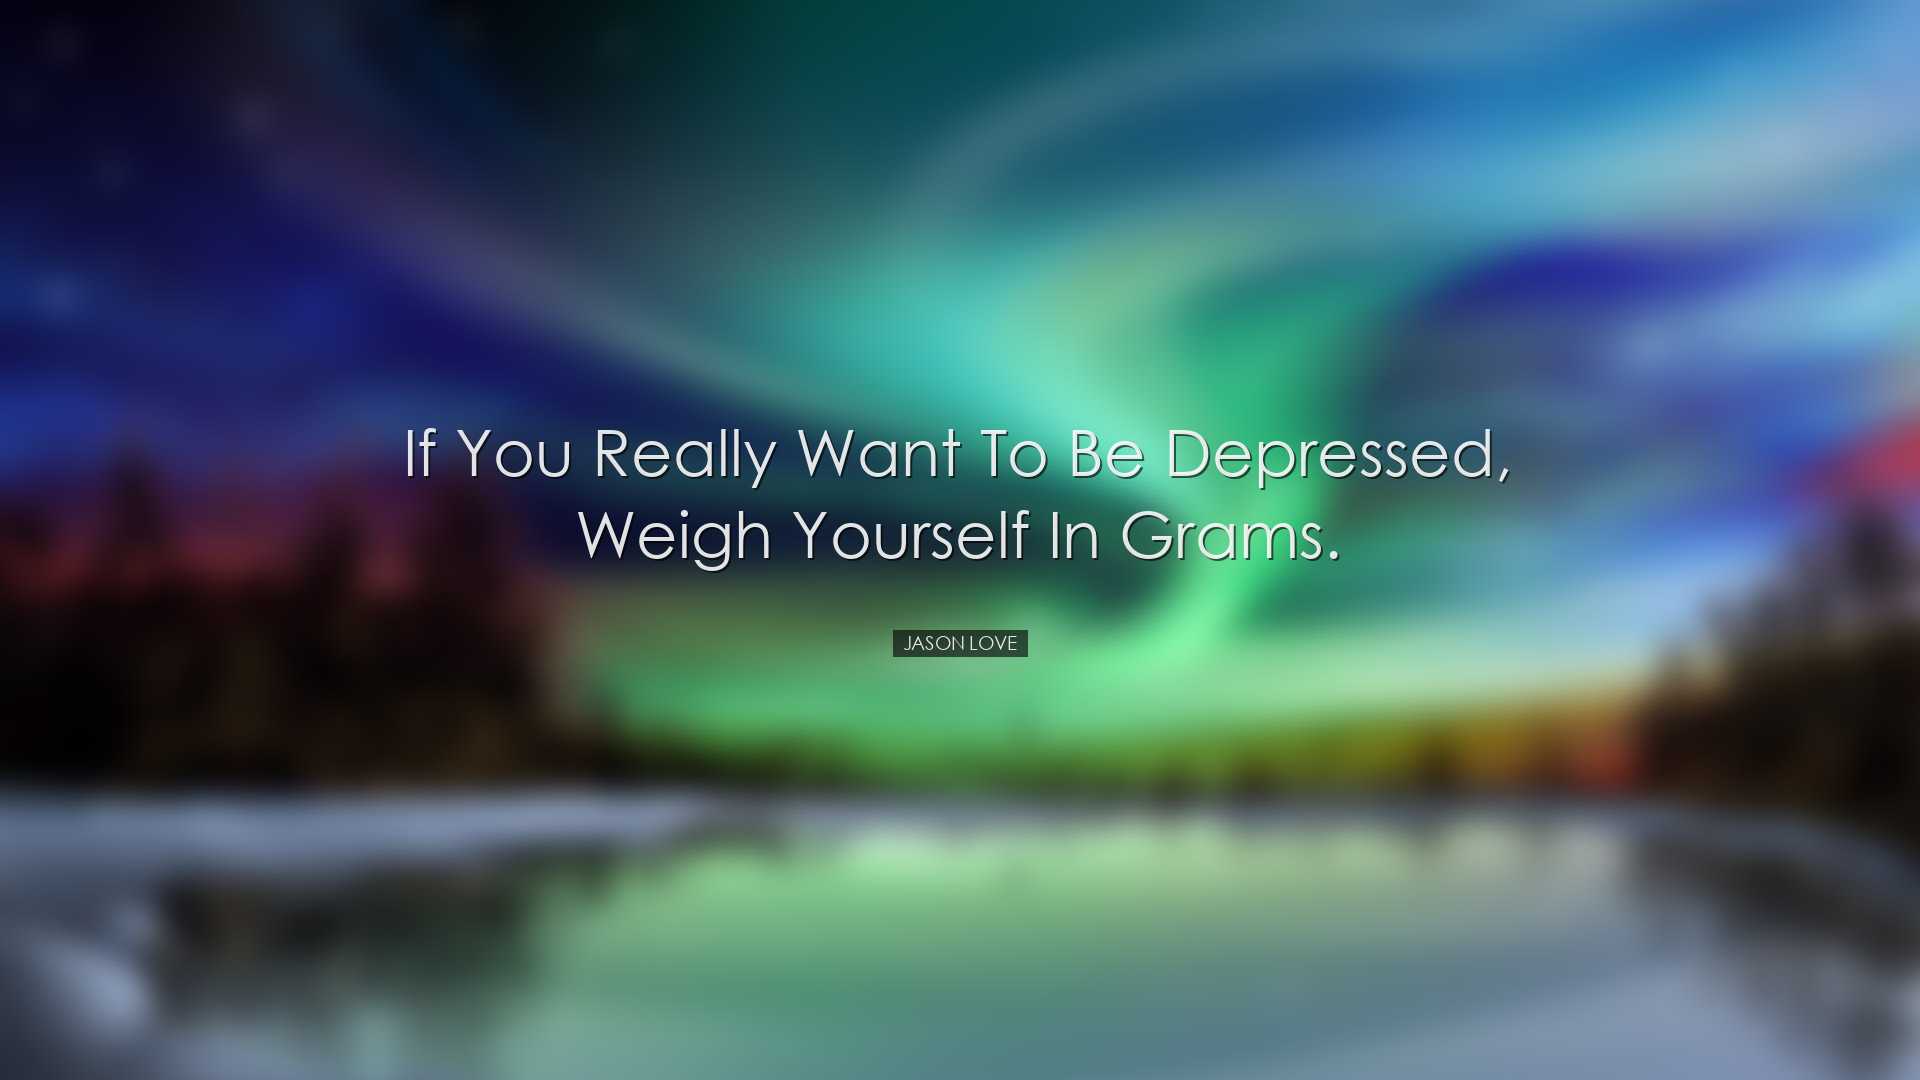 If you really want to be depressed, weigh yourself in grams. - Jas